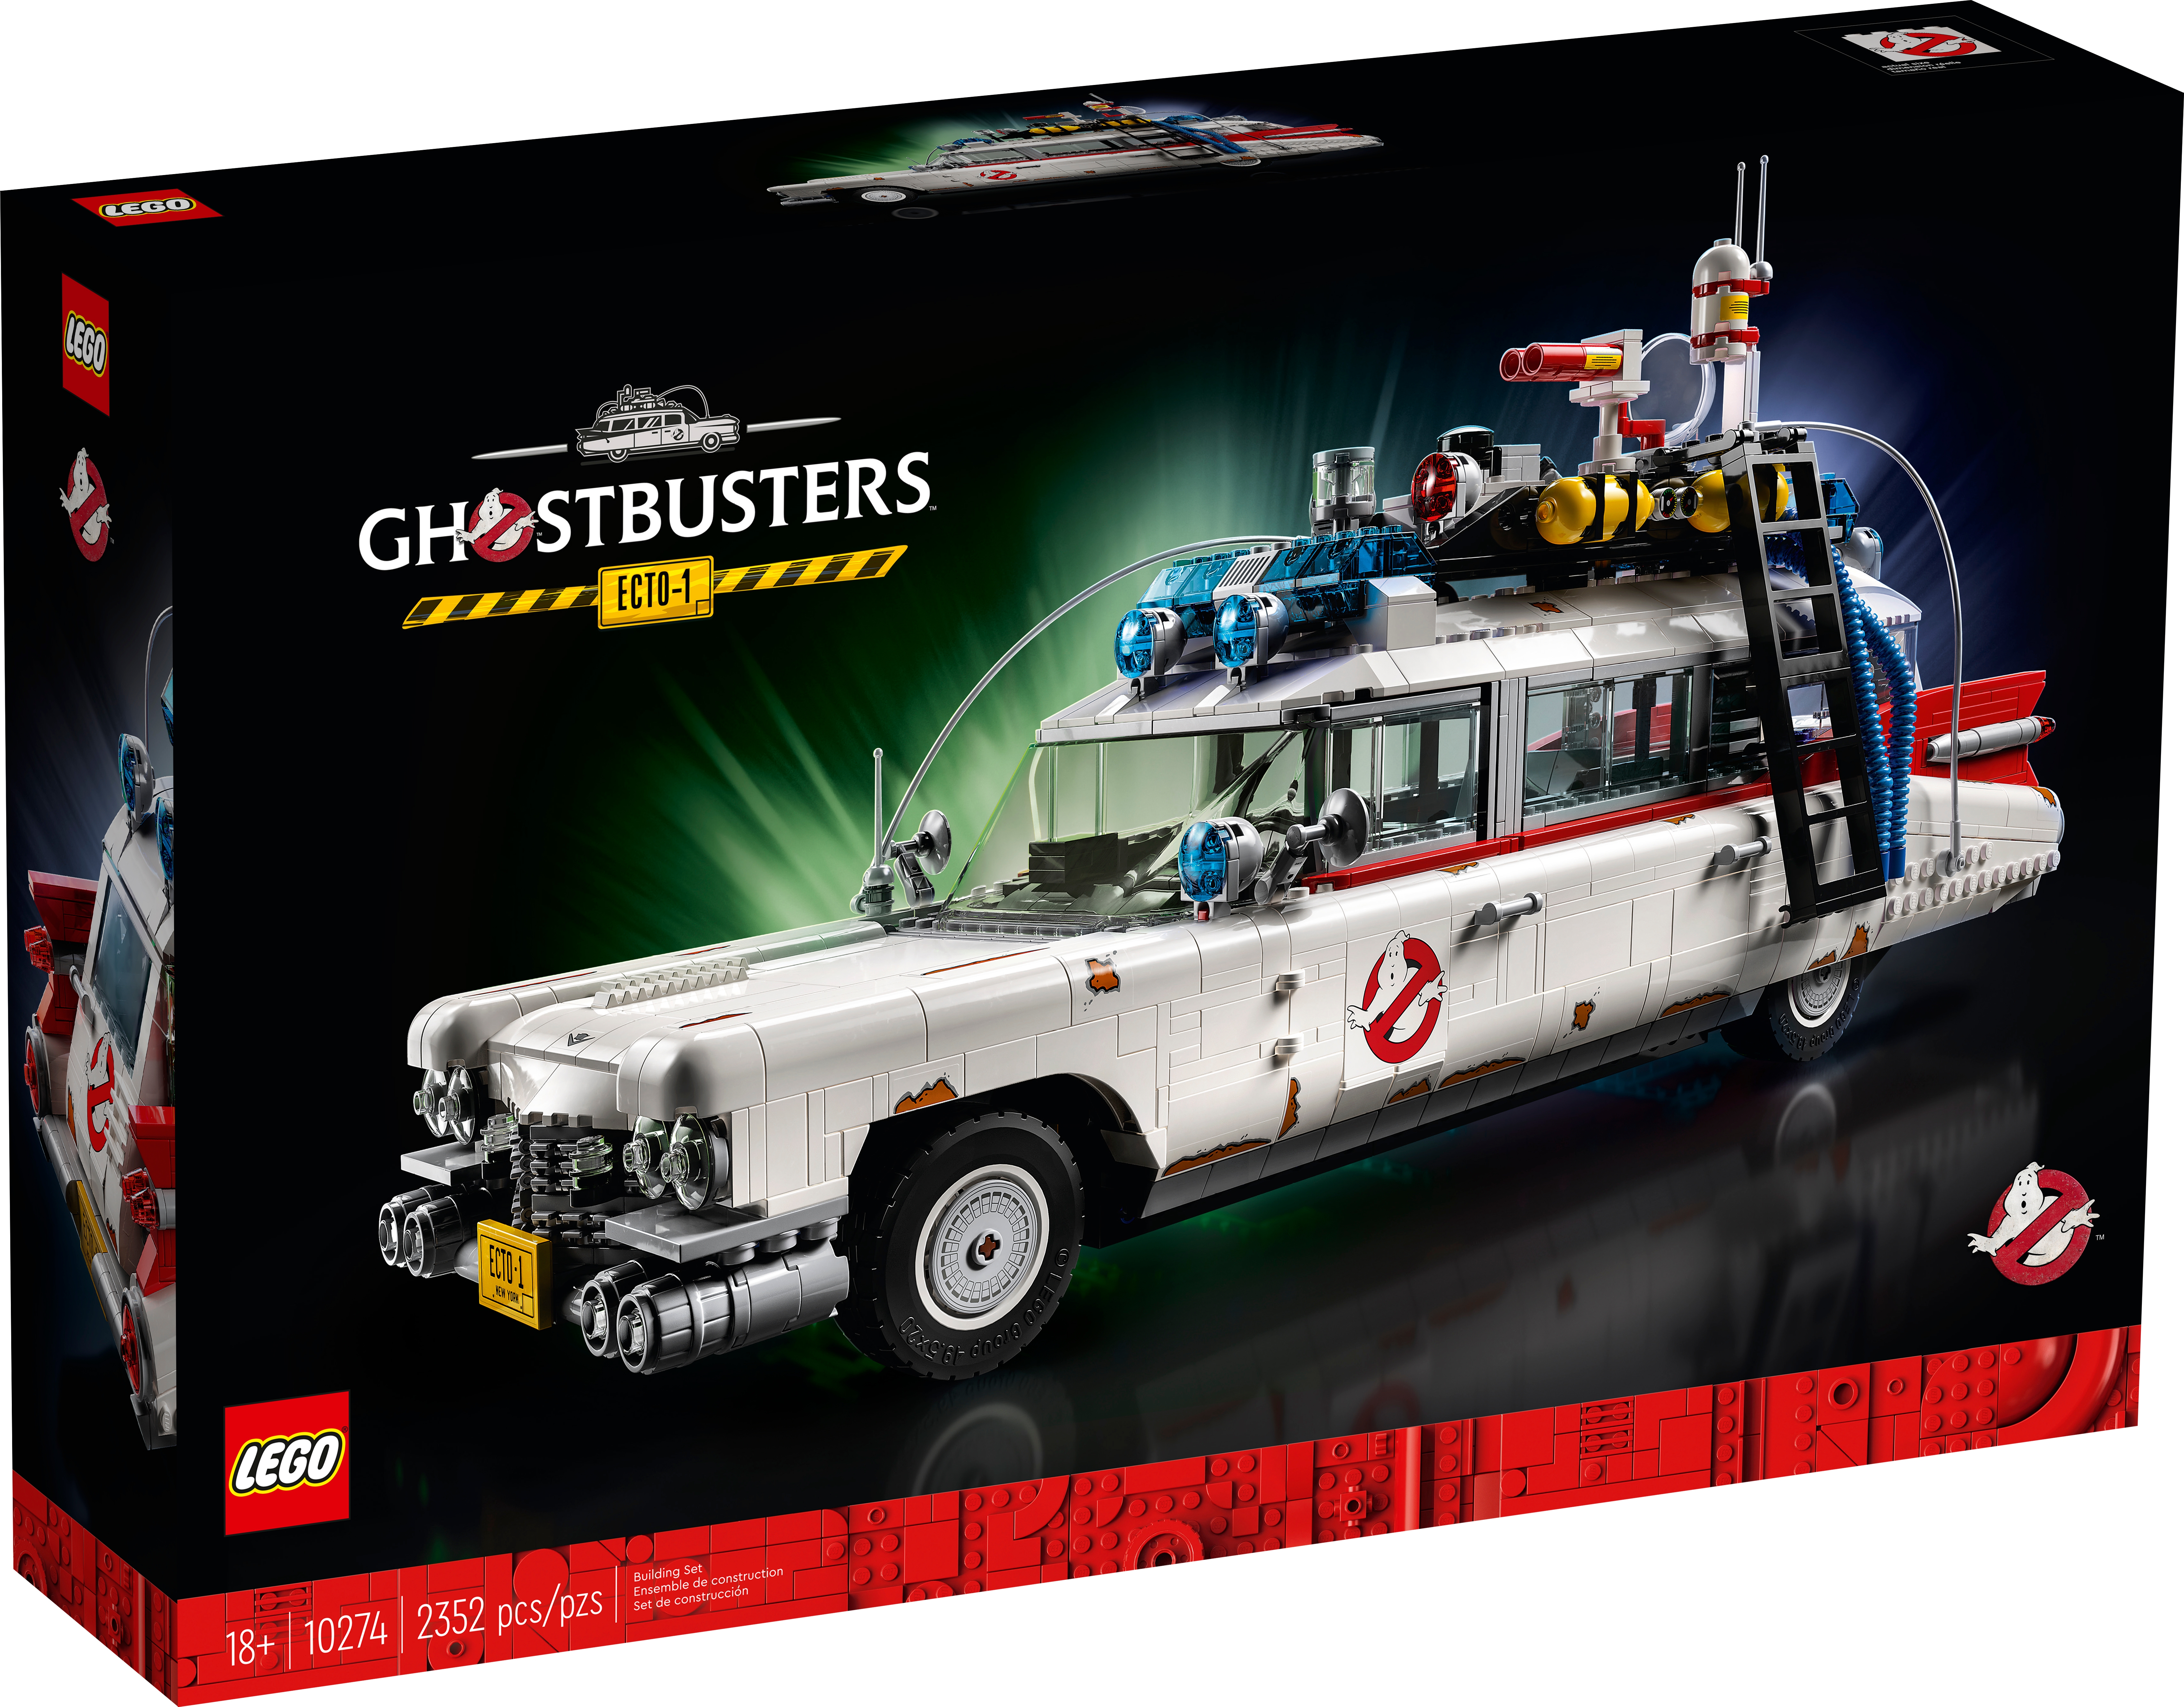 LEGO's 2,300-piece Ghostbusters ECTO-1 falls to new low of $165